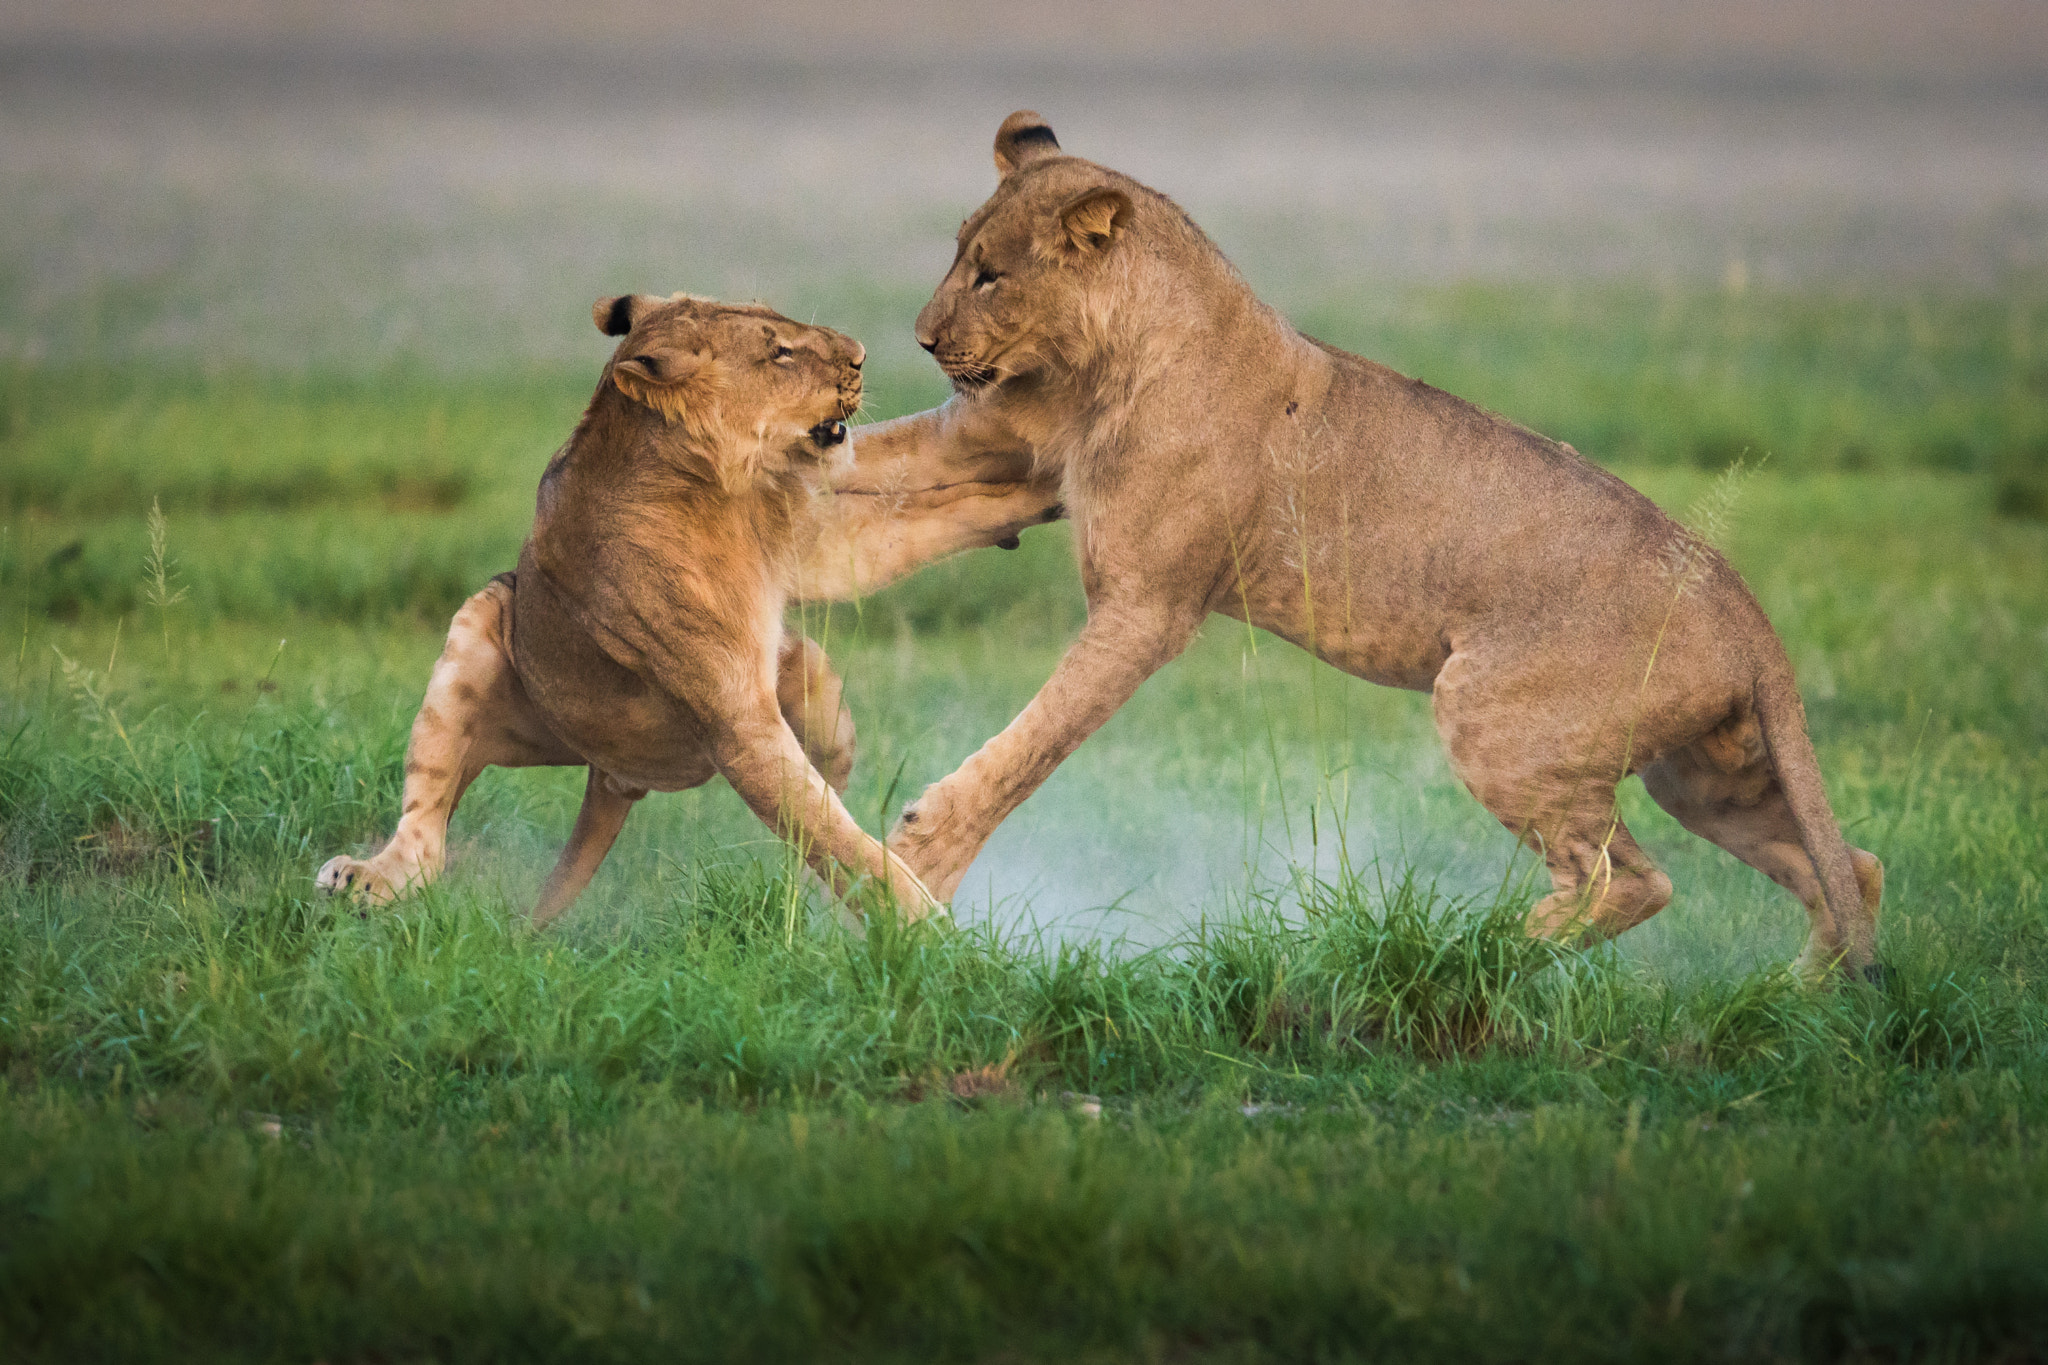 300mm F2.8 G sample photo. Lions game photography